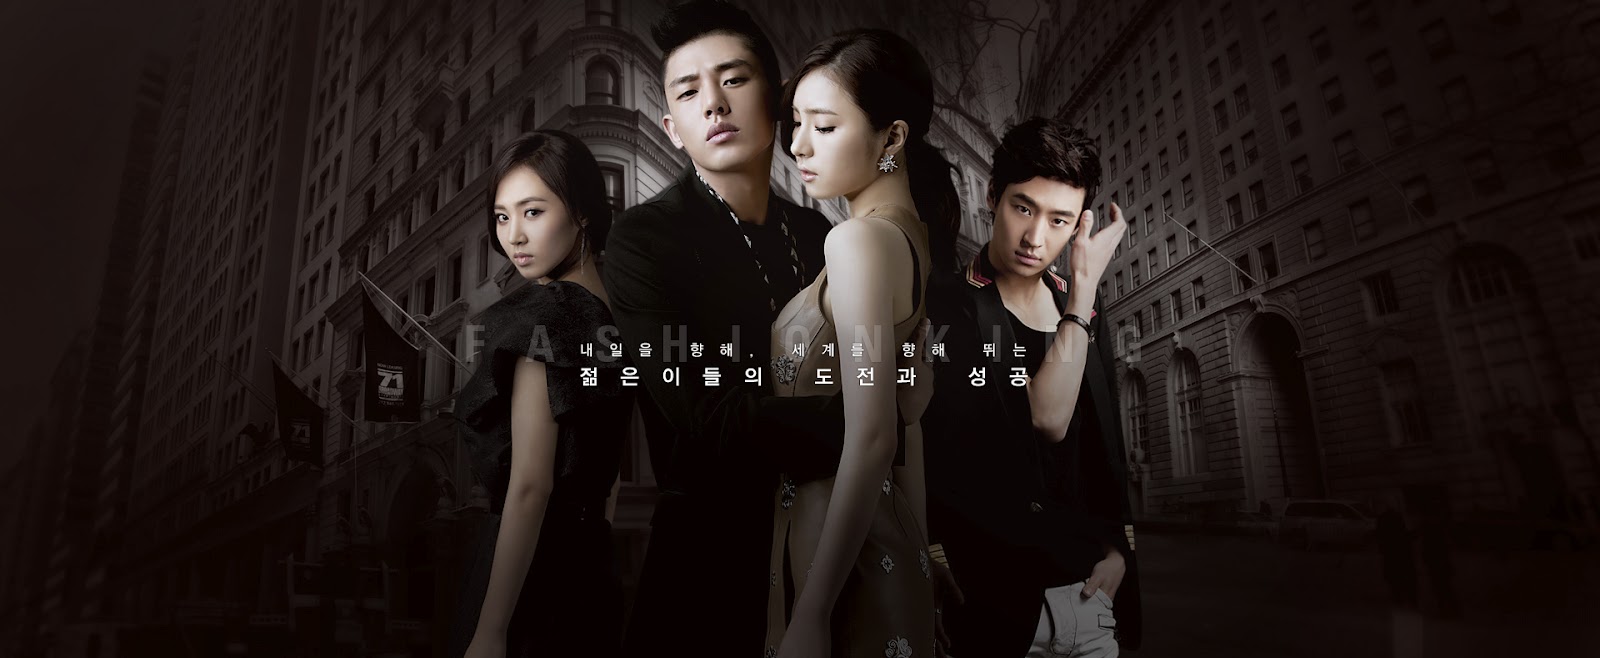 FASHION KING 패션왕 Synopsis, Photos, Poster and Wallpapers New Korean